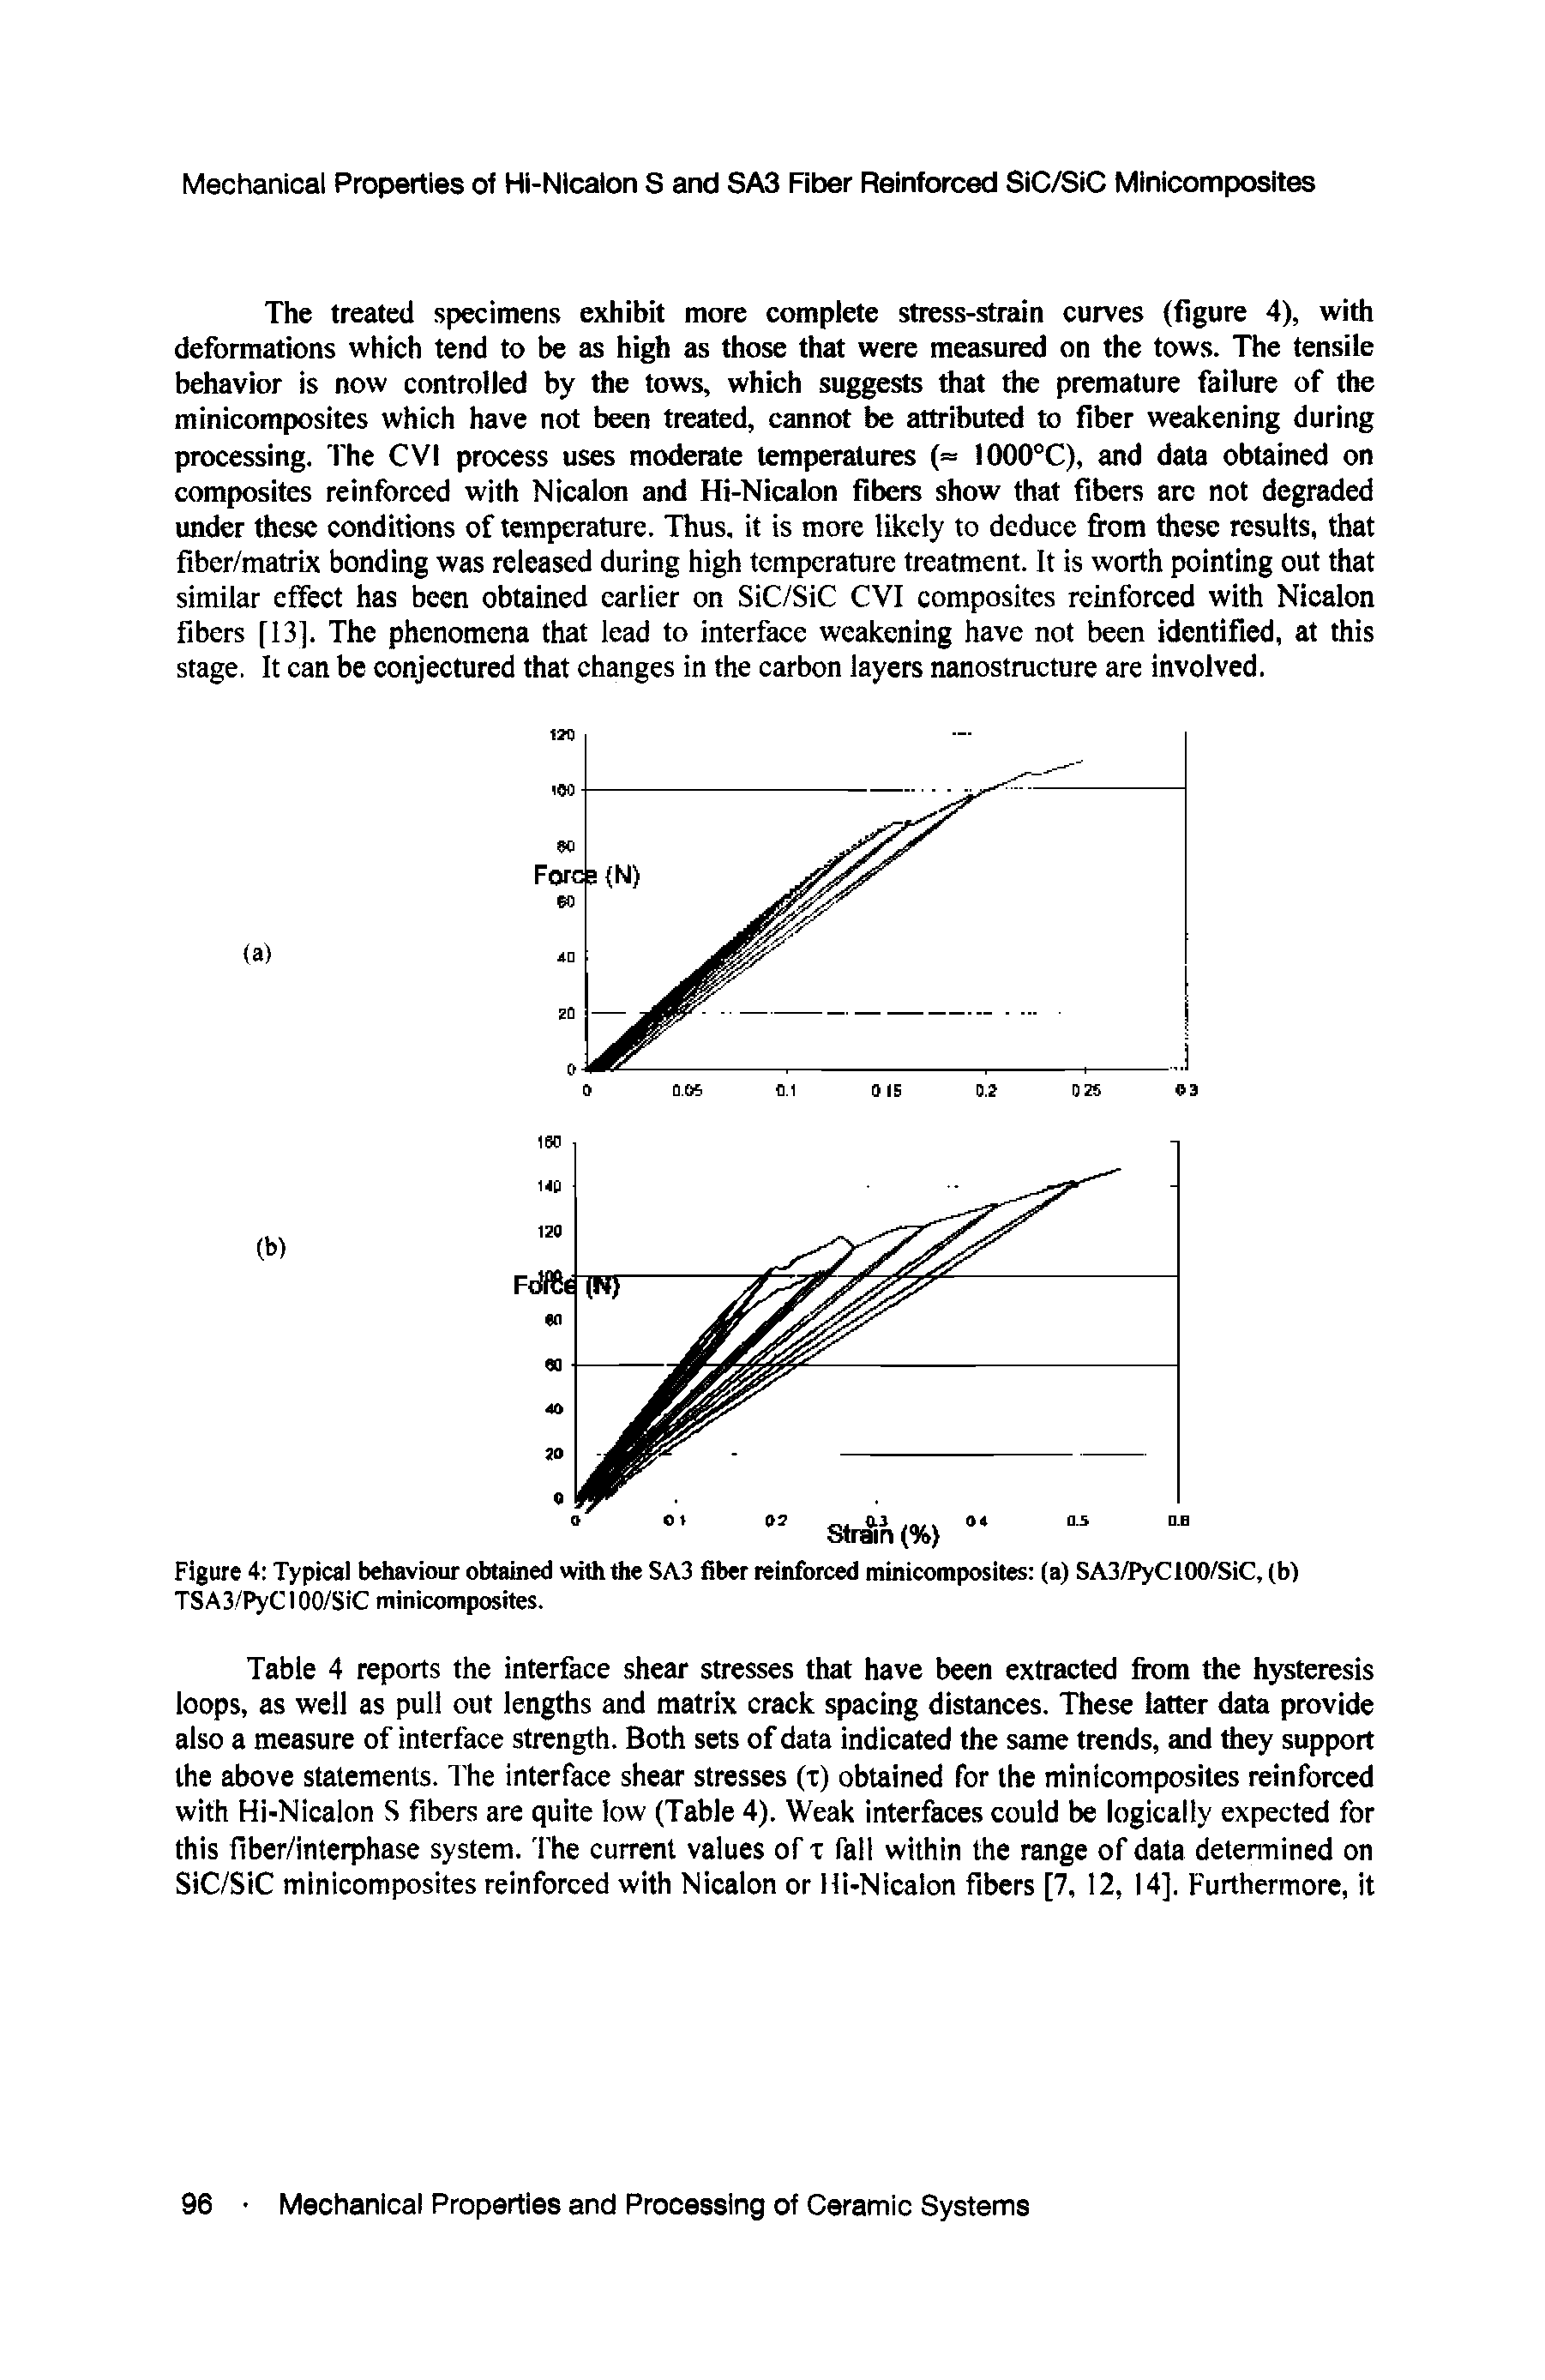 Table 4 reports the interface shear stresses that have been extracted from the hysteresis loops, as well as pull out lengths and matrix crack spacing distances. These latter data provide also a measure of interface strength. Both sets of data indicated the same trends, and they support the above statements. The interface shear stresses (t) obtained for the minicomposites reinforced with Hi-Nicalon S fibers are quite low (Table 4). Weak interfaces could be logically expected for this Hber/interphase system, fhe current values of x fall within the range of data detennined on SiC/SiC minicomposites reinforced with Nicalon or Hi-Nicalon fibers [7, 12, 14]. Furthermore, it...